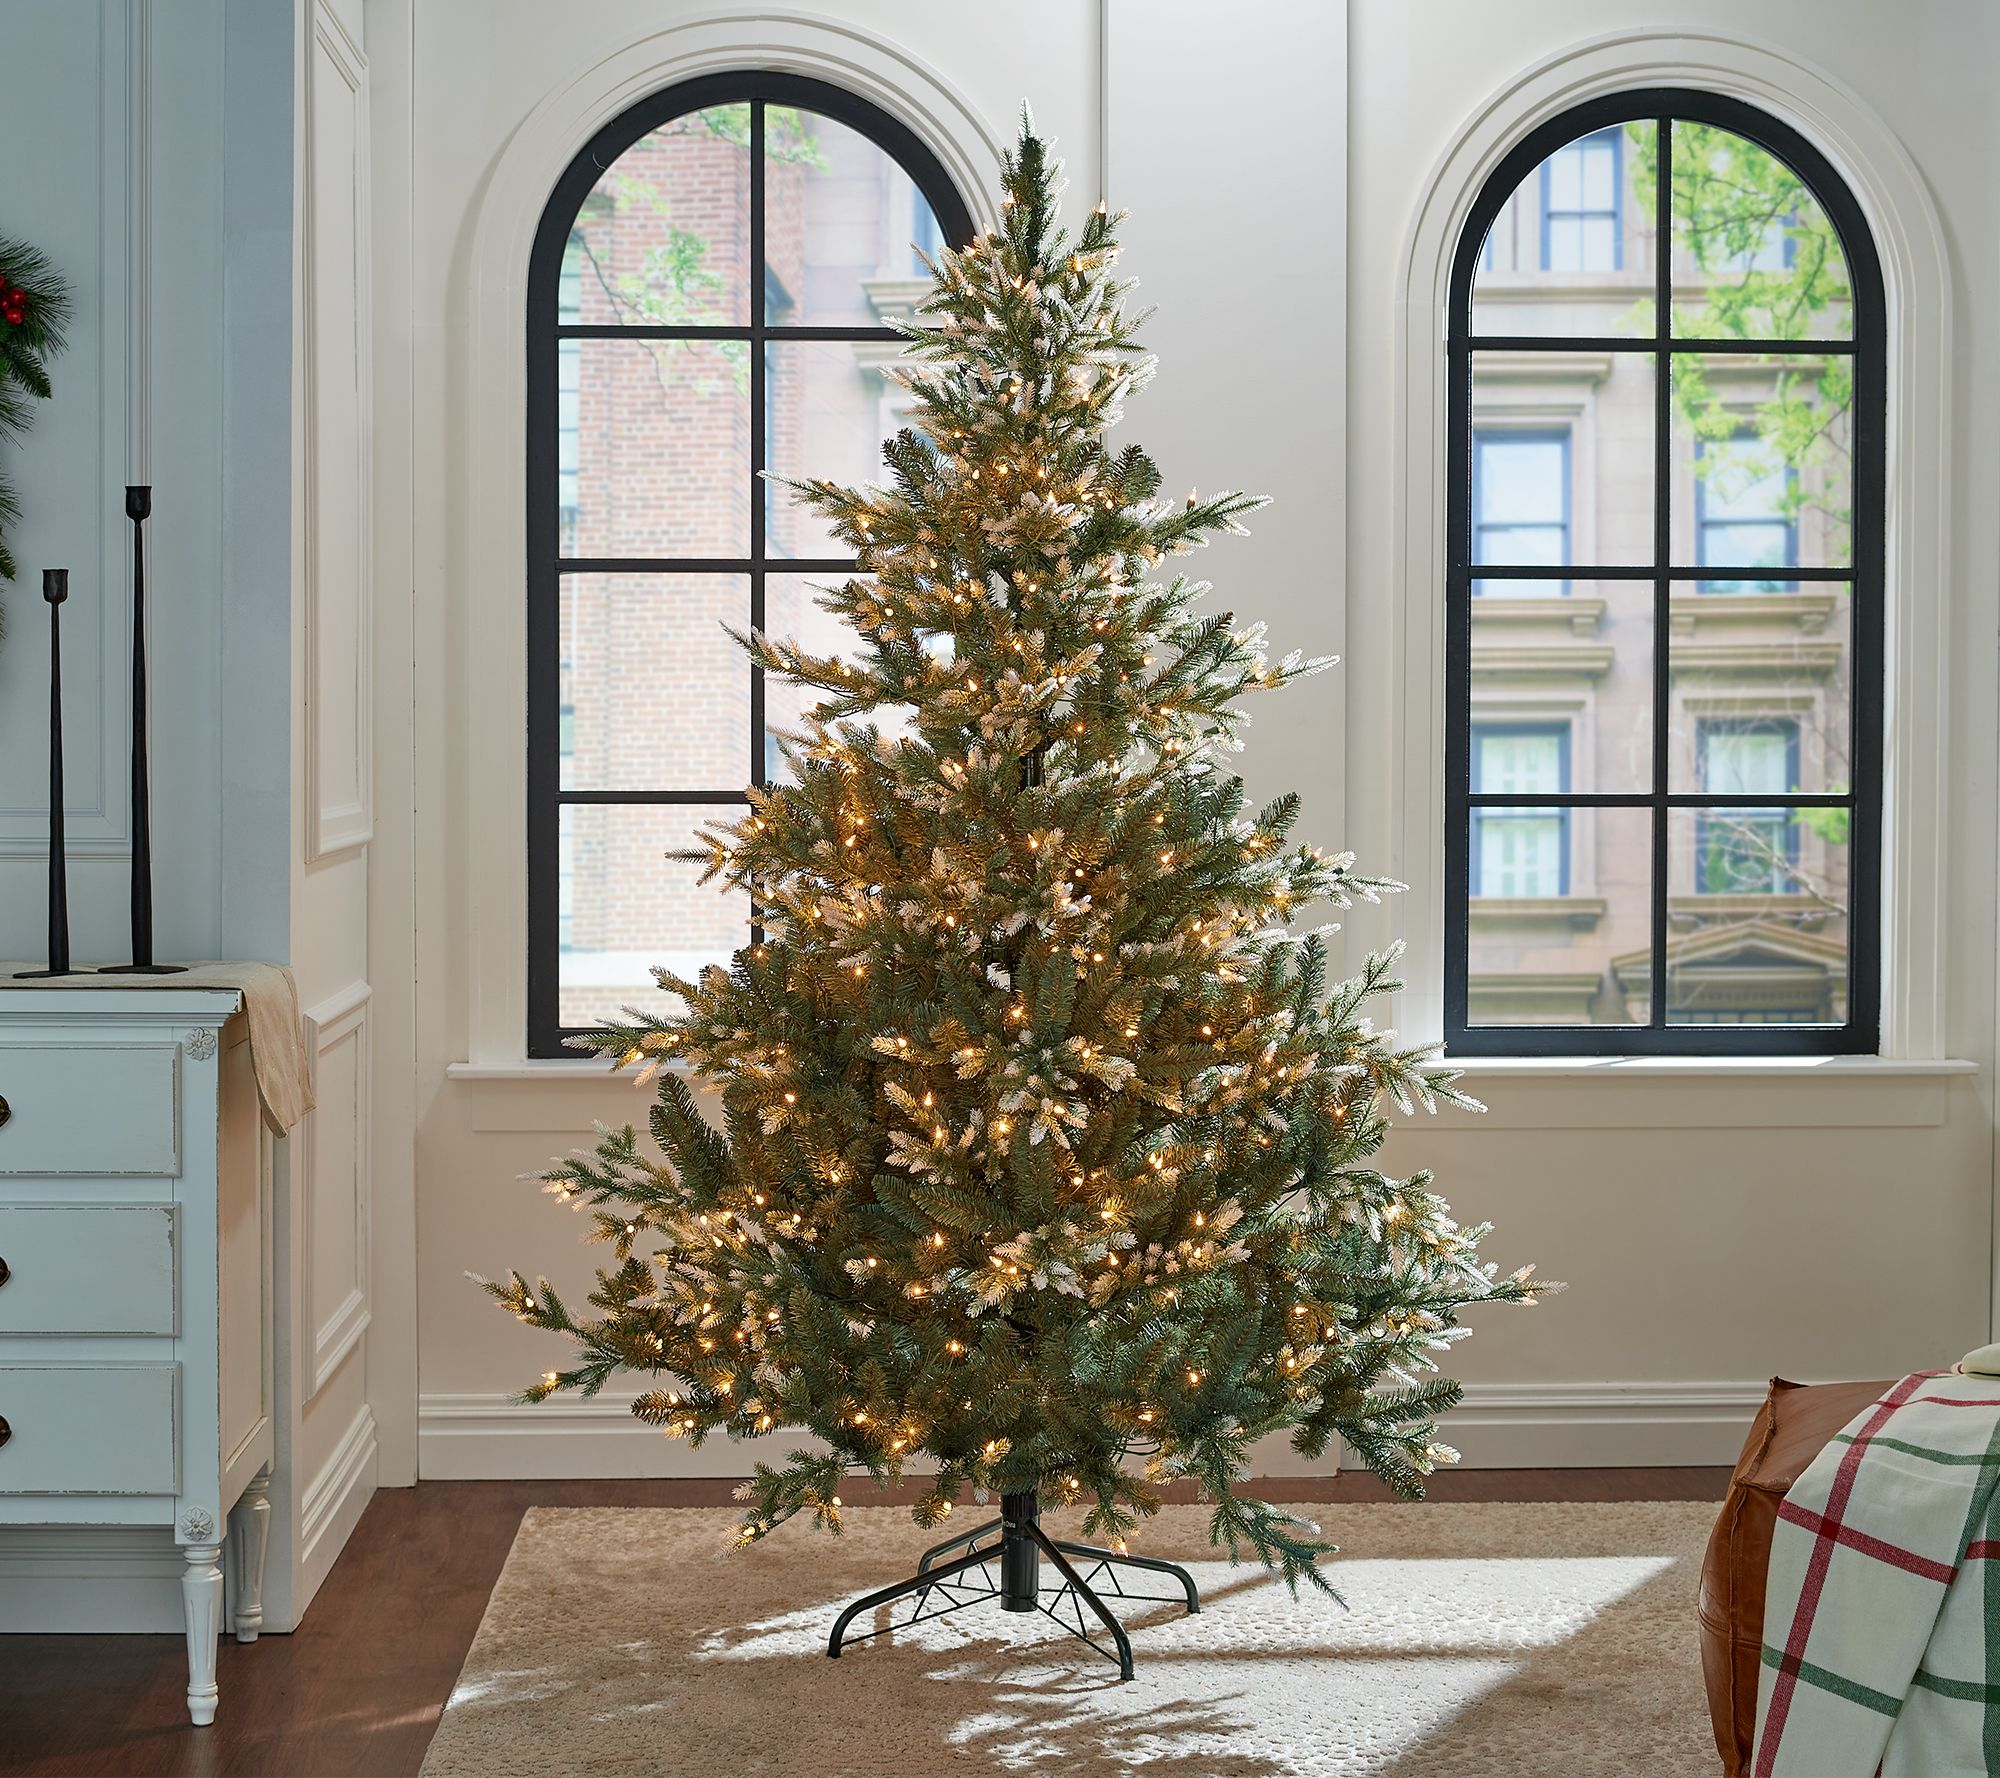 How to Trim and Decorate a Christmas Tree, According to the Martha